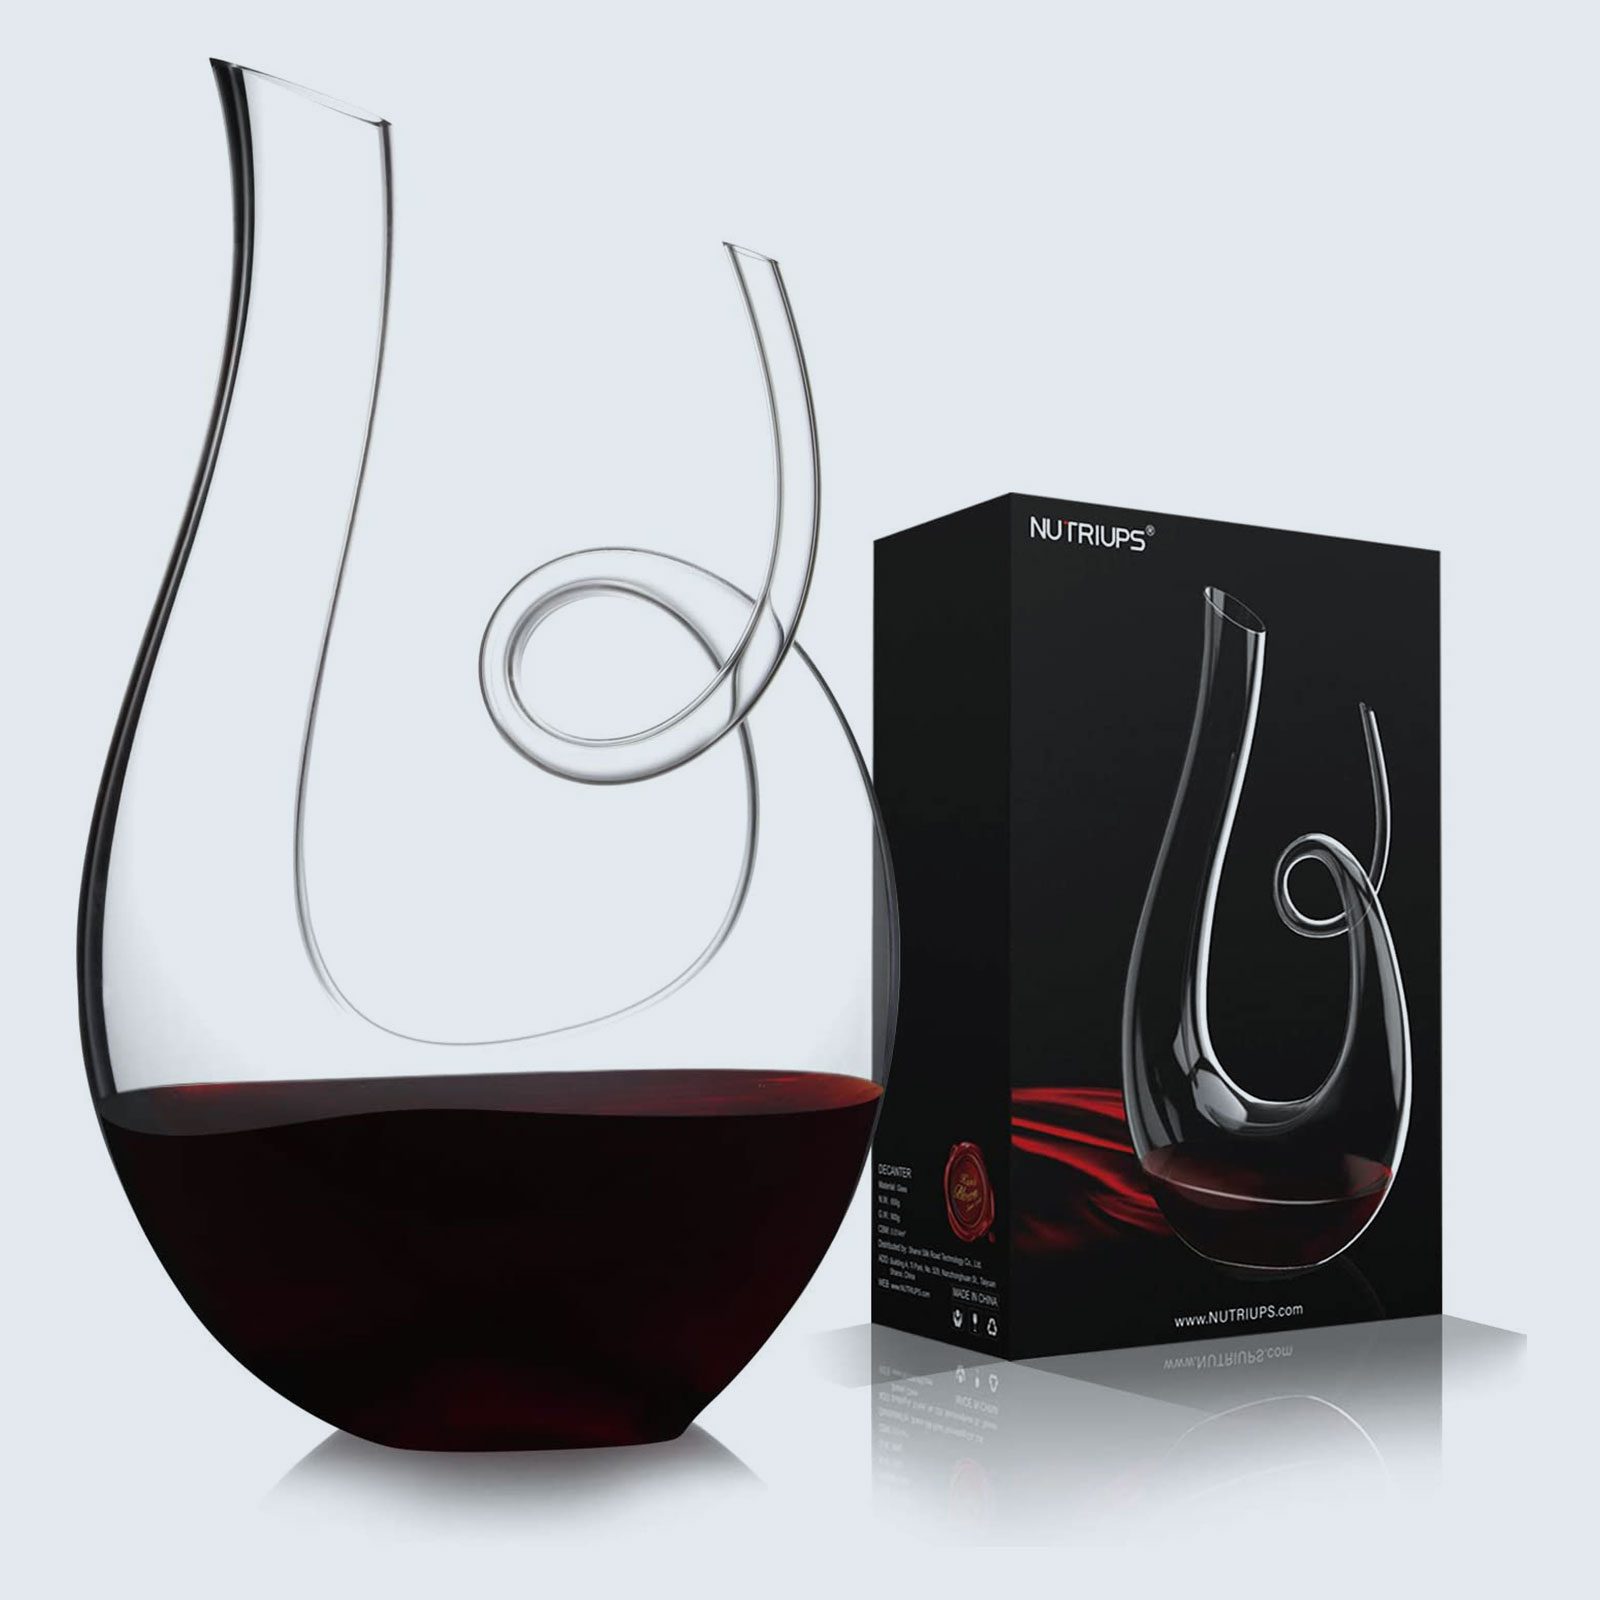 For the wine connoisseur: NUTRIUPS Wine Decanter